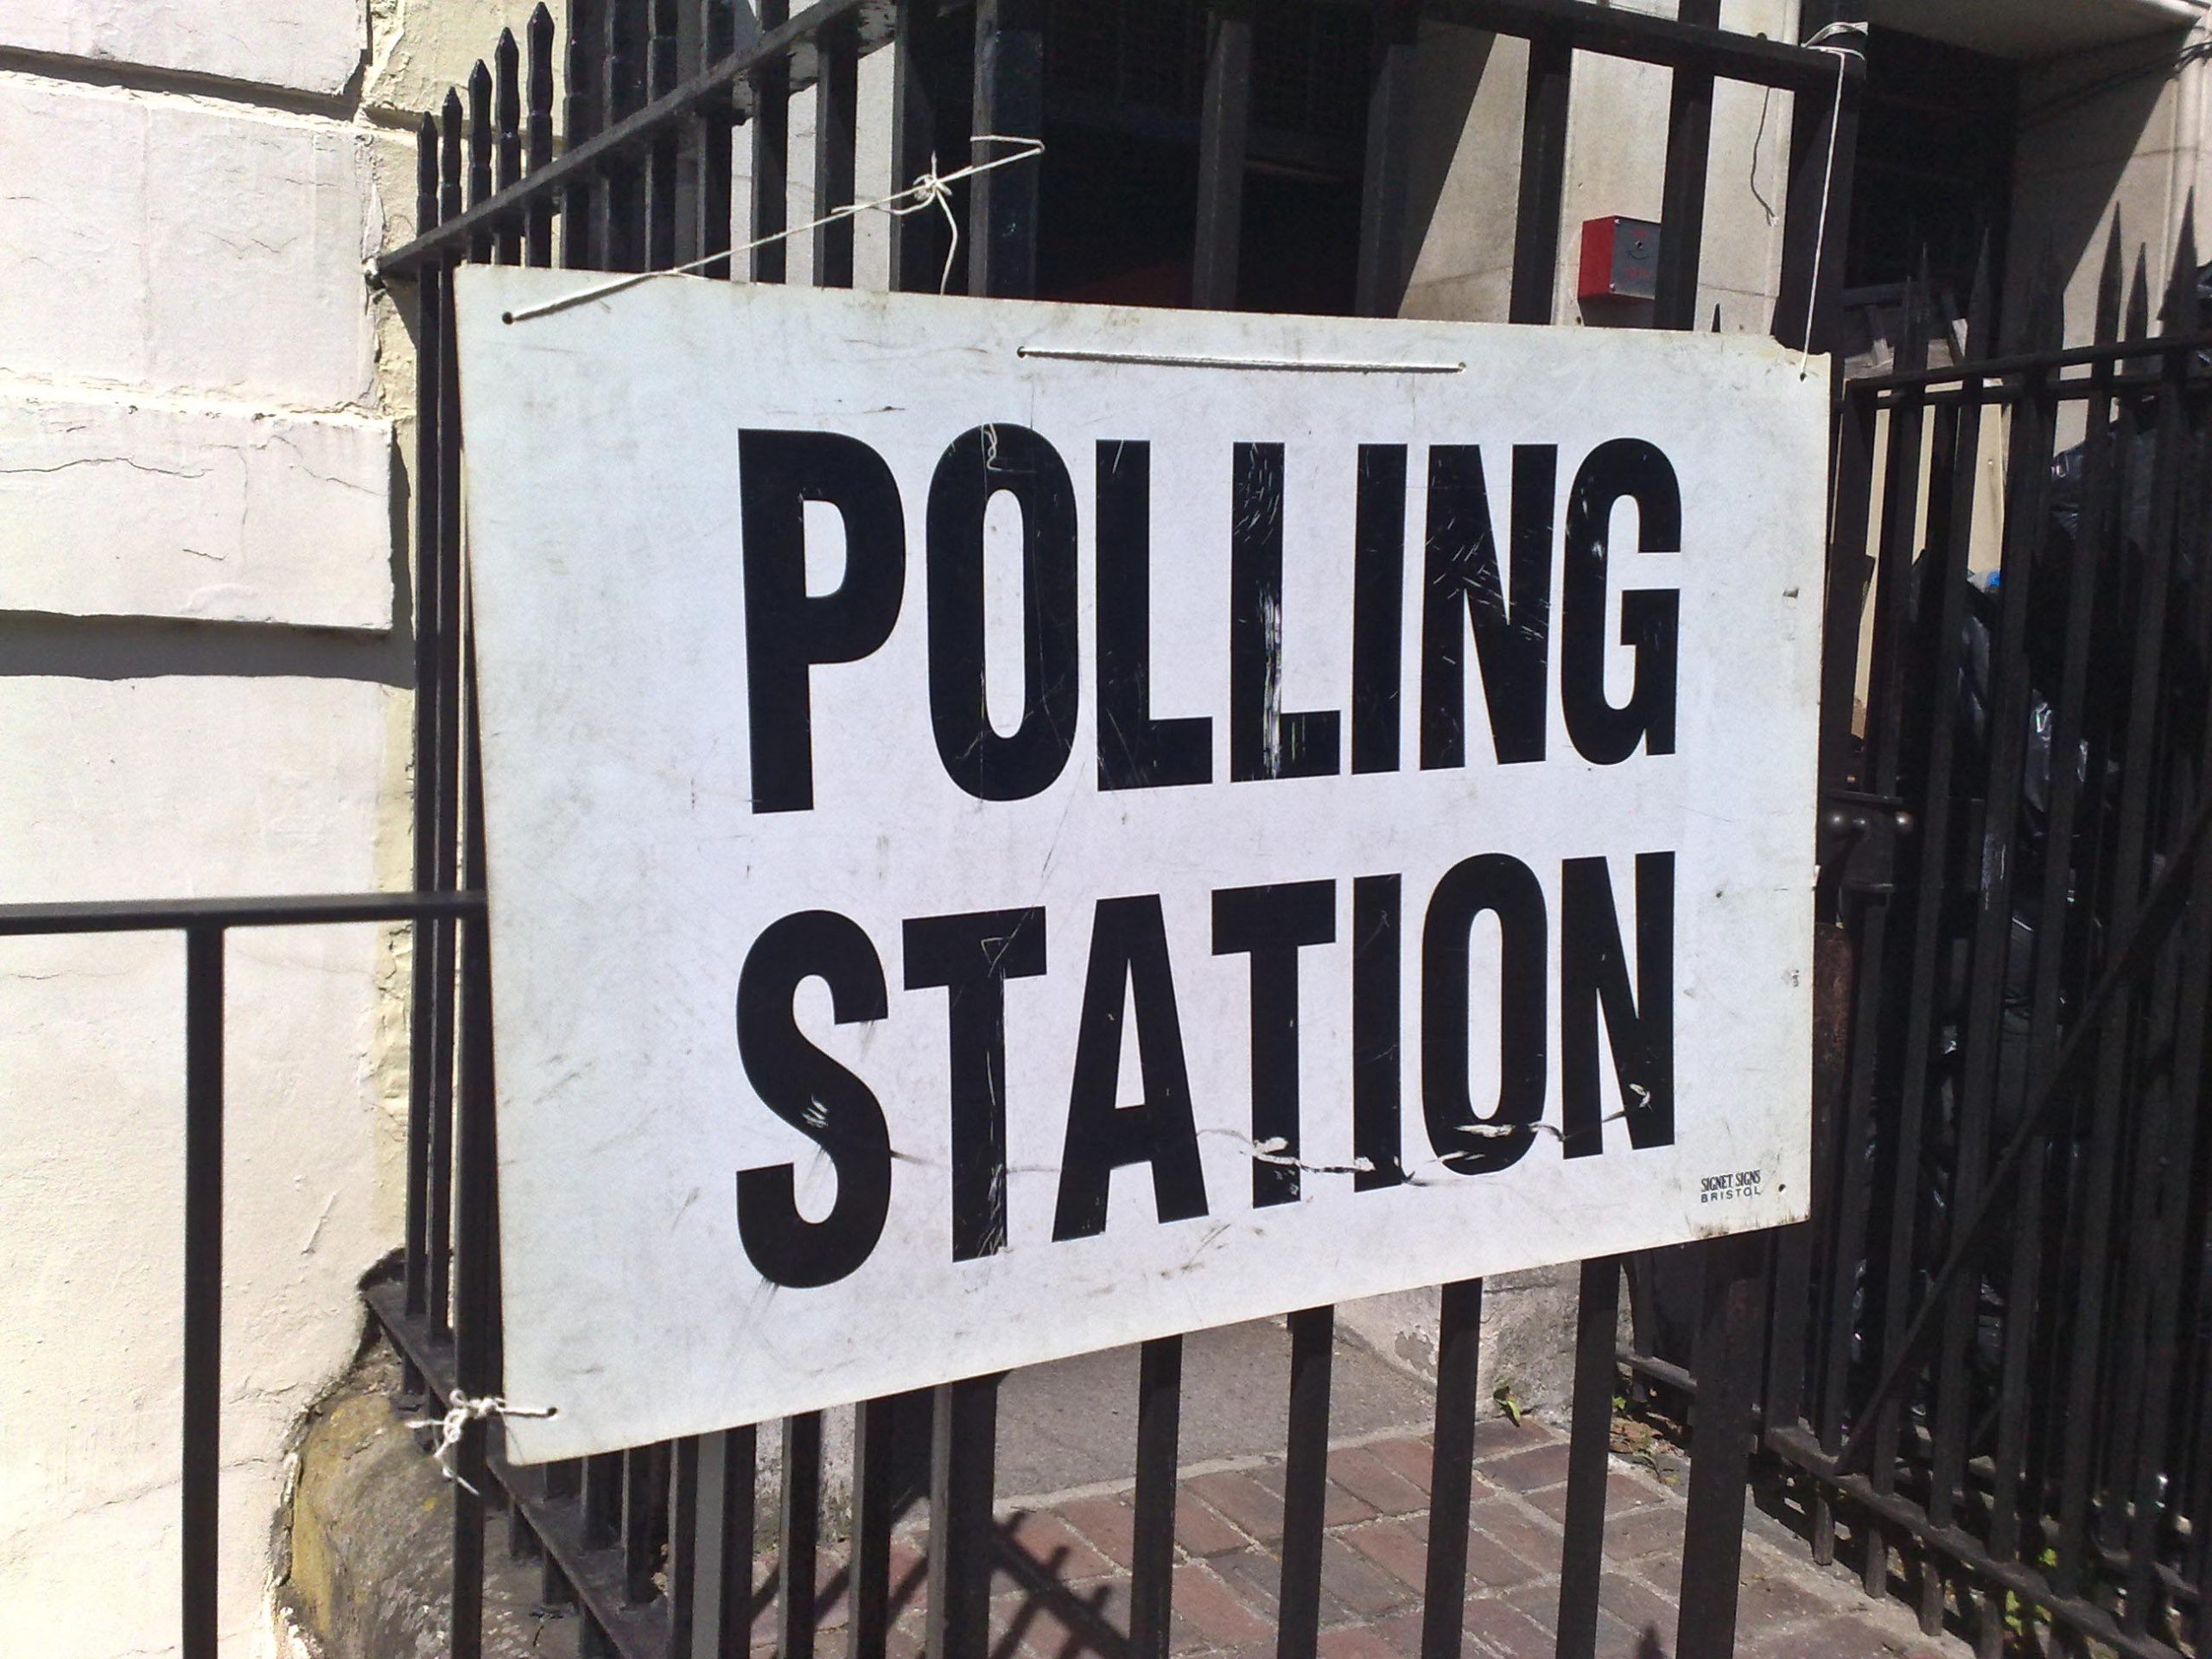 UK polling station image from Wikipedia